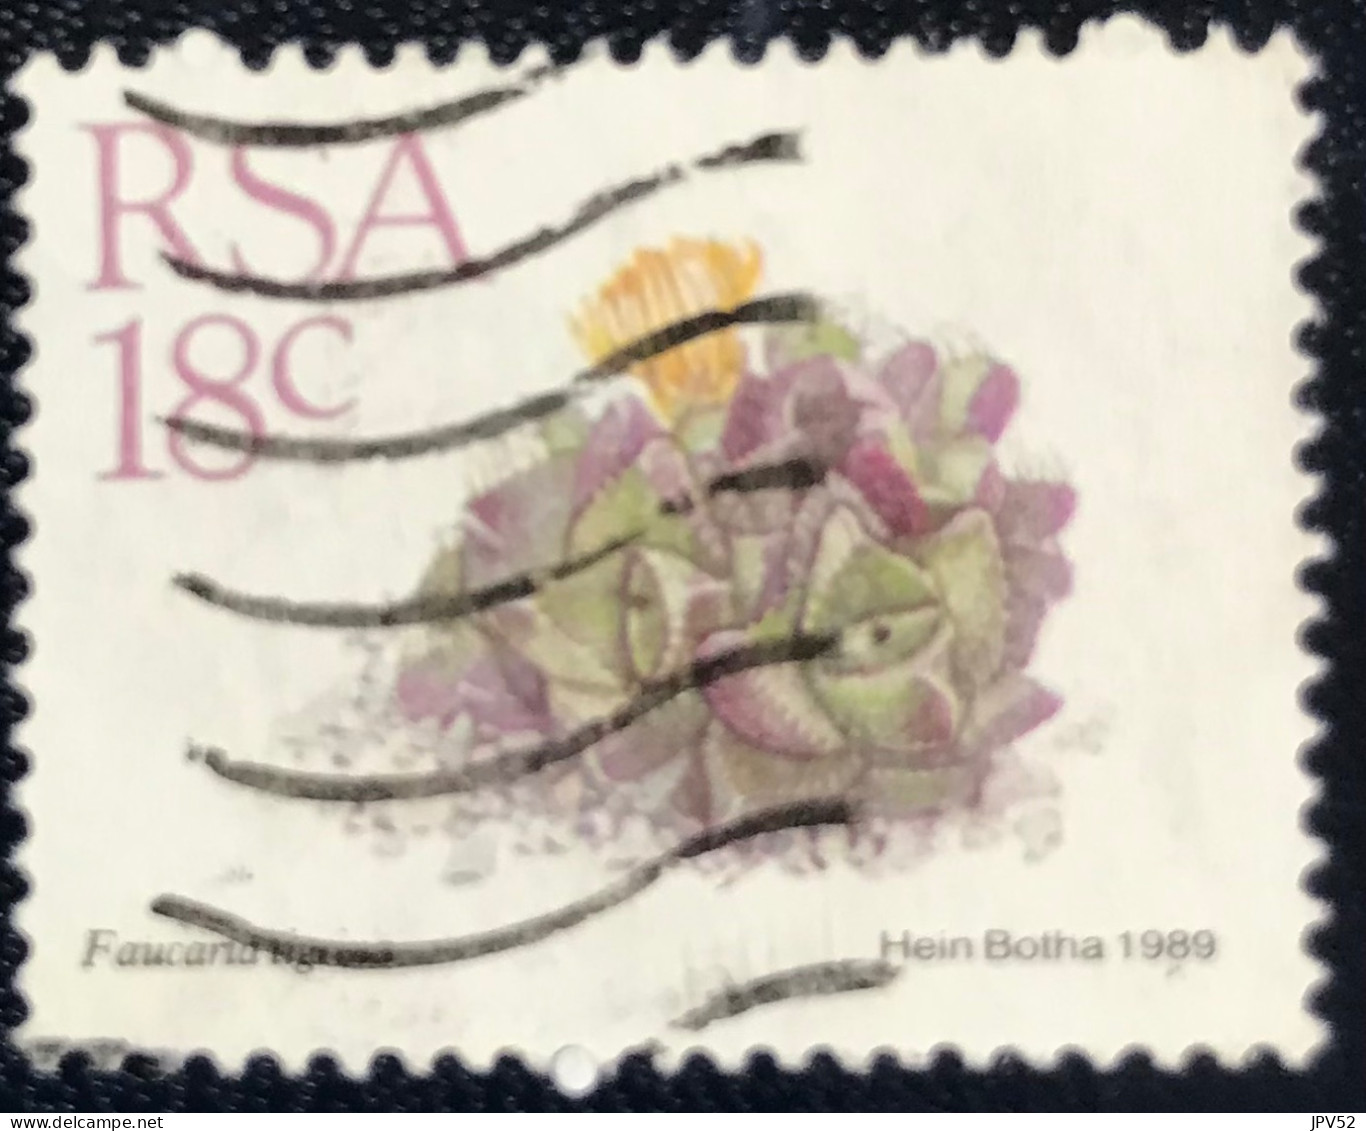 RSA - South Africa - Suid-Afrika  - C18/6 - 1989 - (°)used - Michel 770 - Vetplanten - Used Stamps